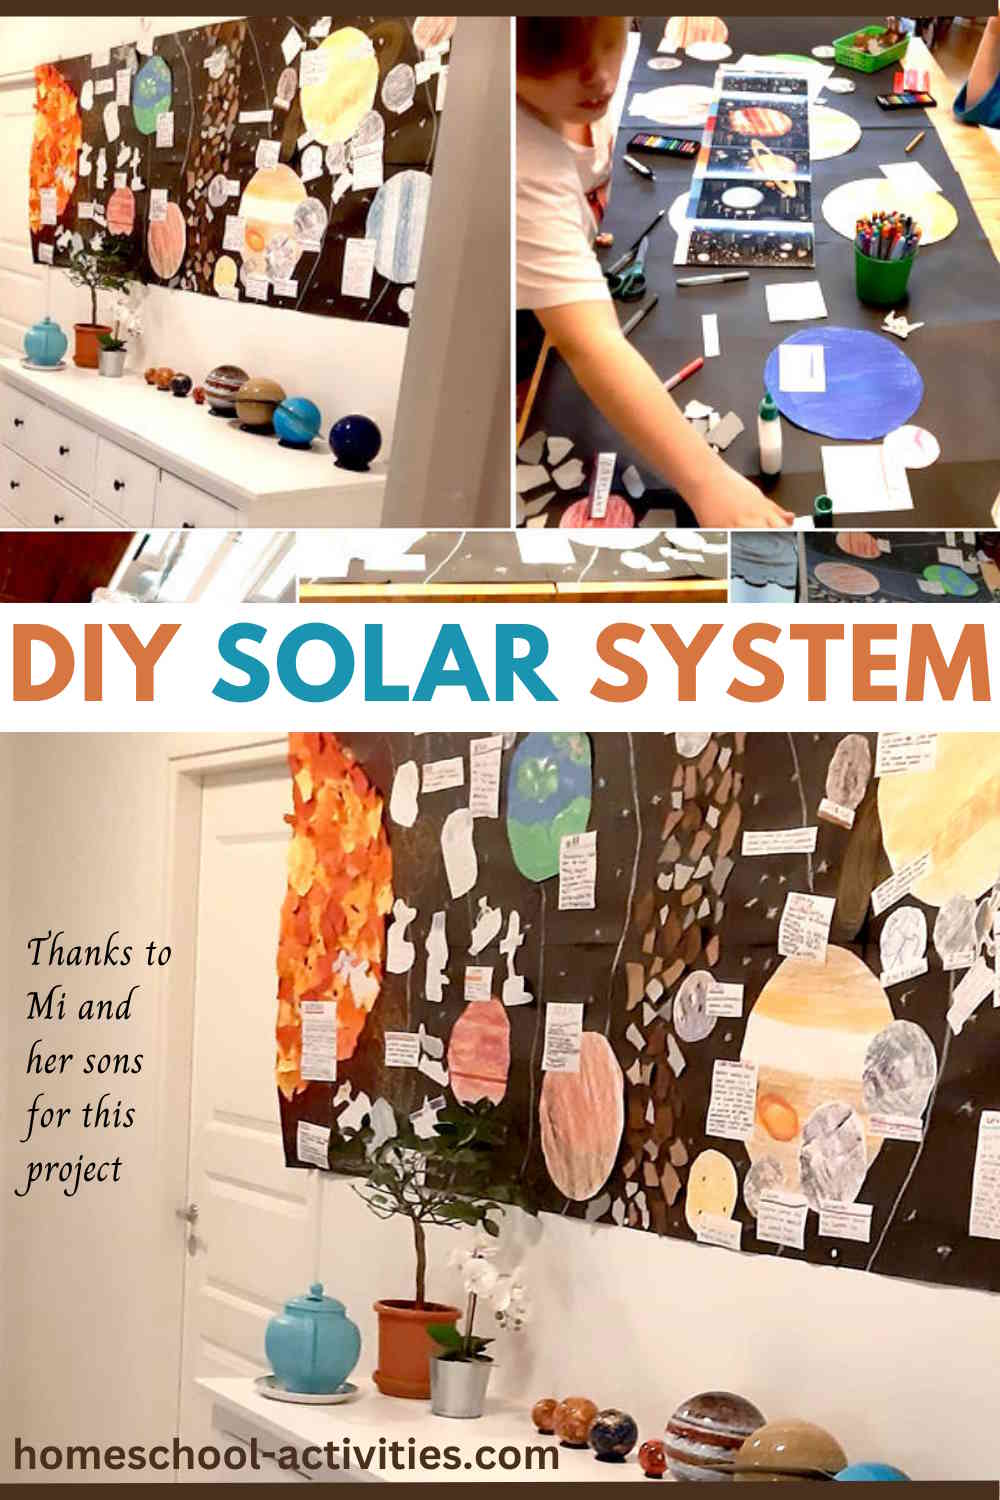 How to Make Solar System Model for School Project?